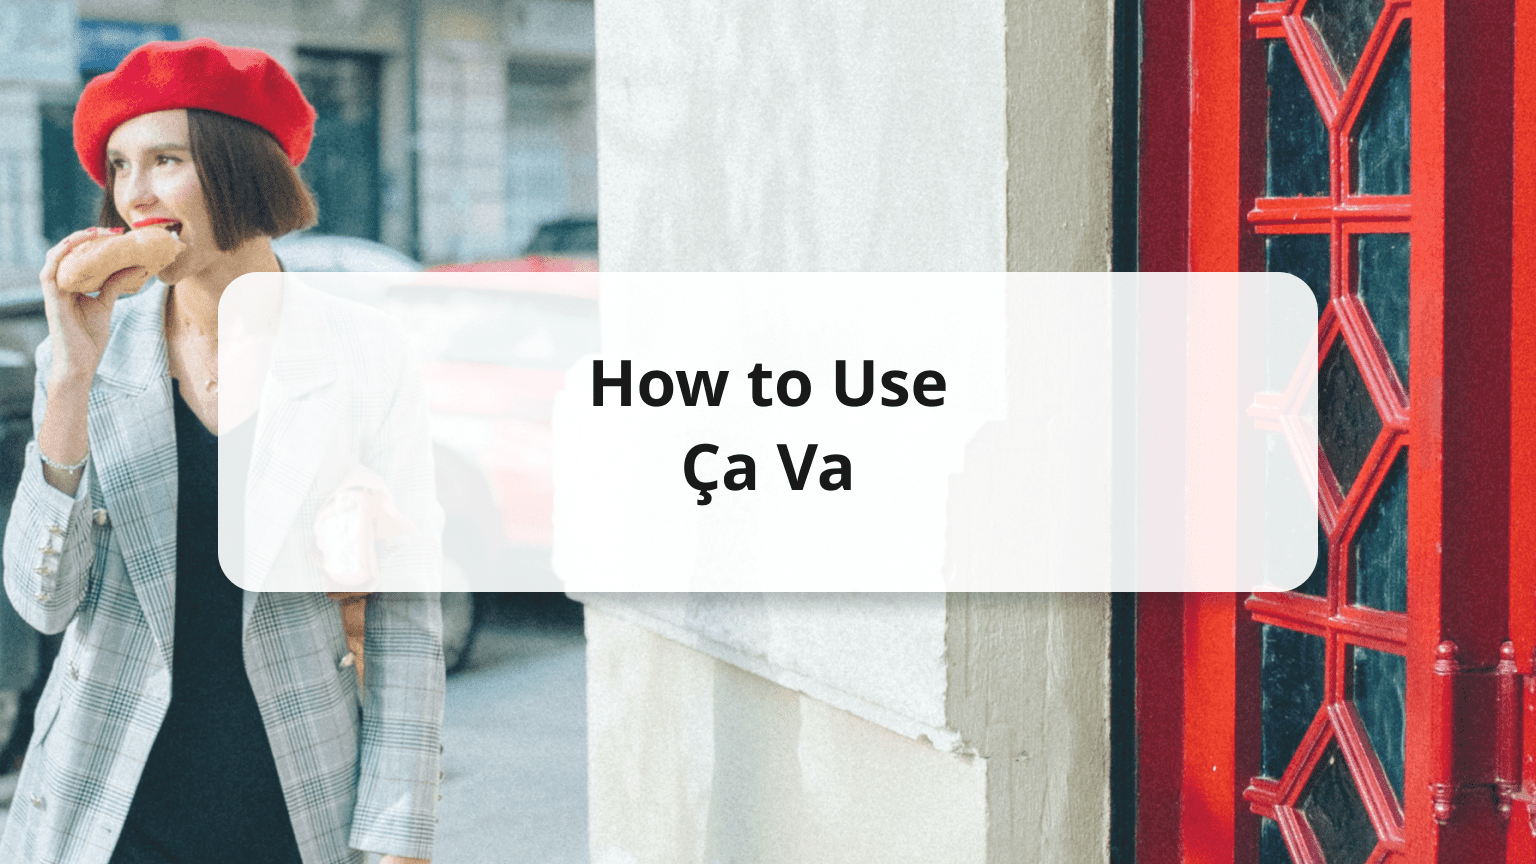 Sa va? How to Finally Understand and Use French Texting Slang